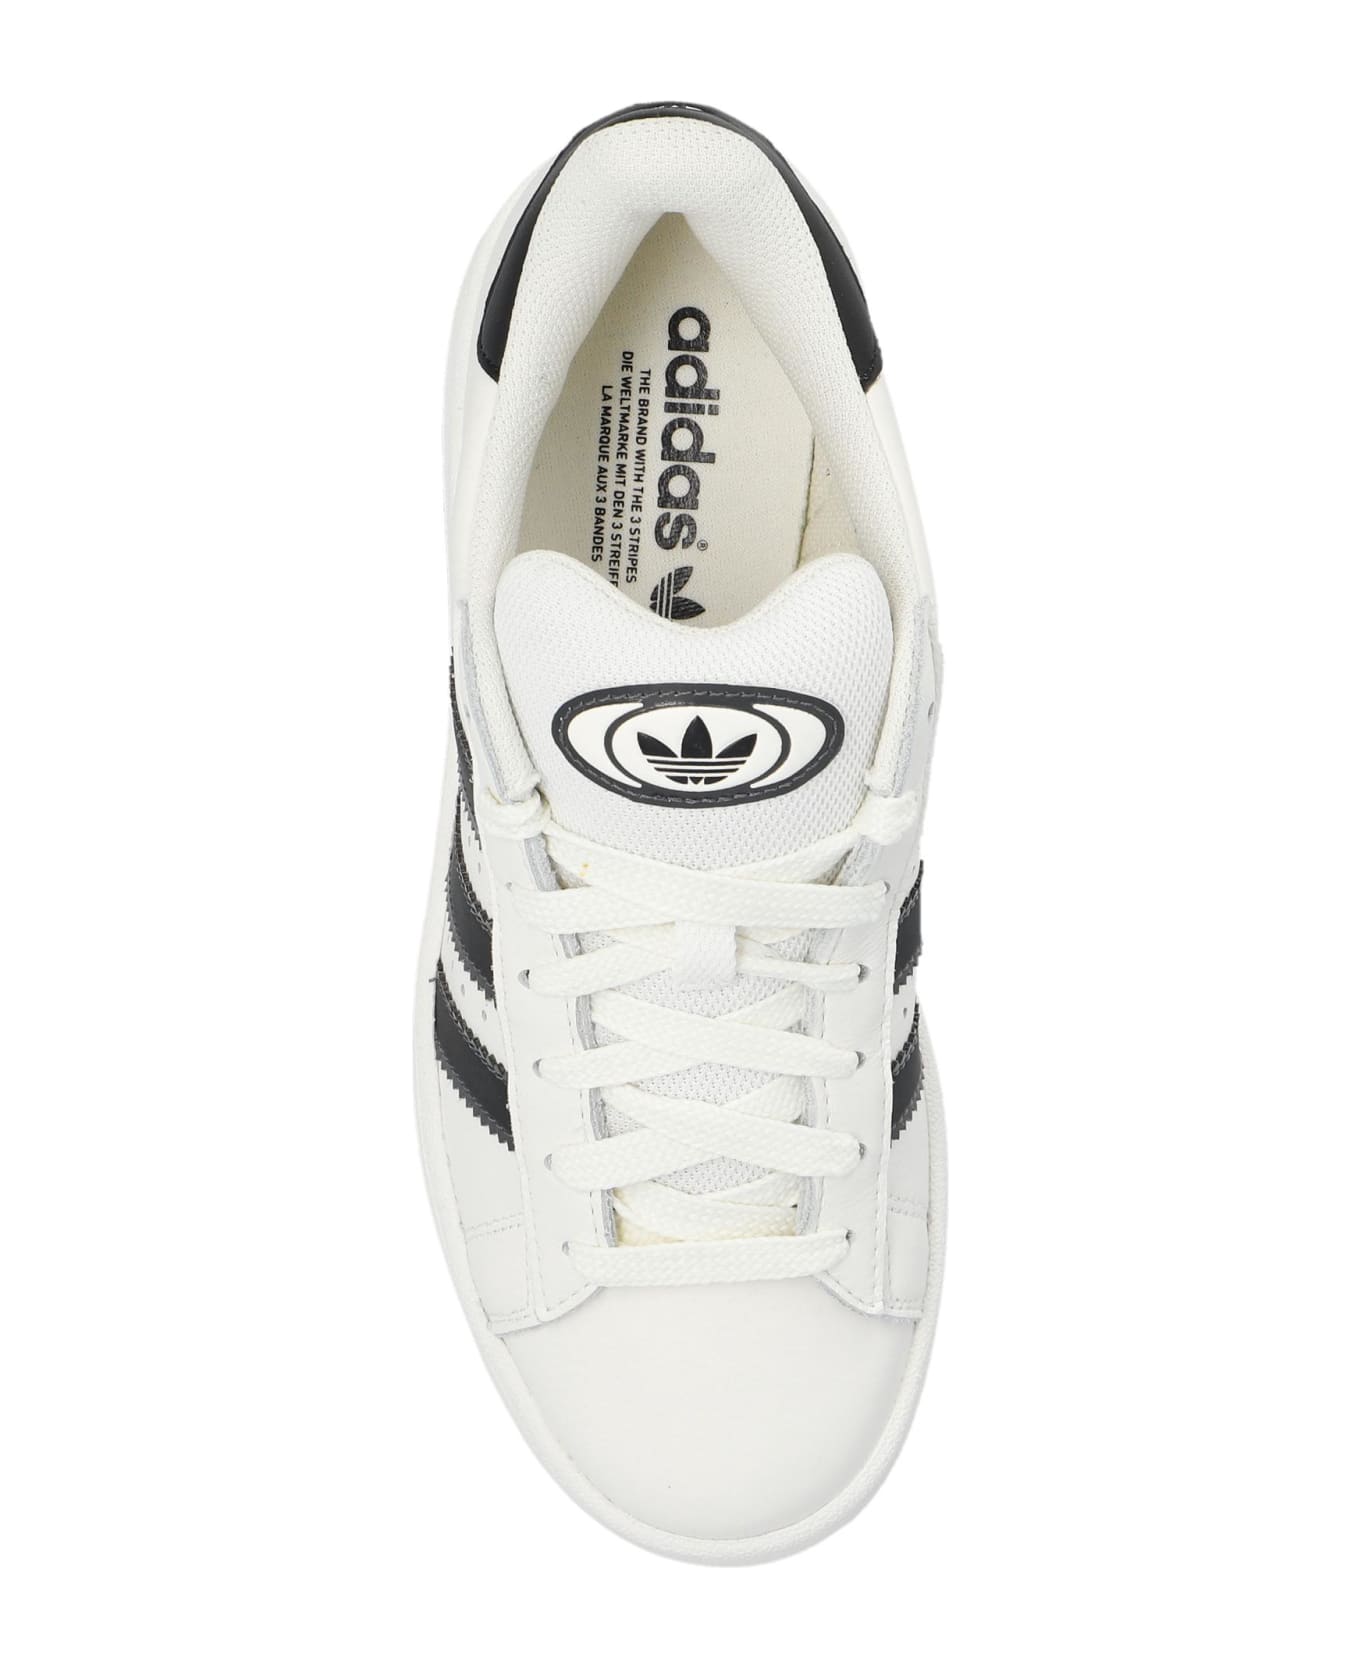 Adidas 'campus 00s' Sneakers - White and black スニーカー